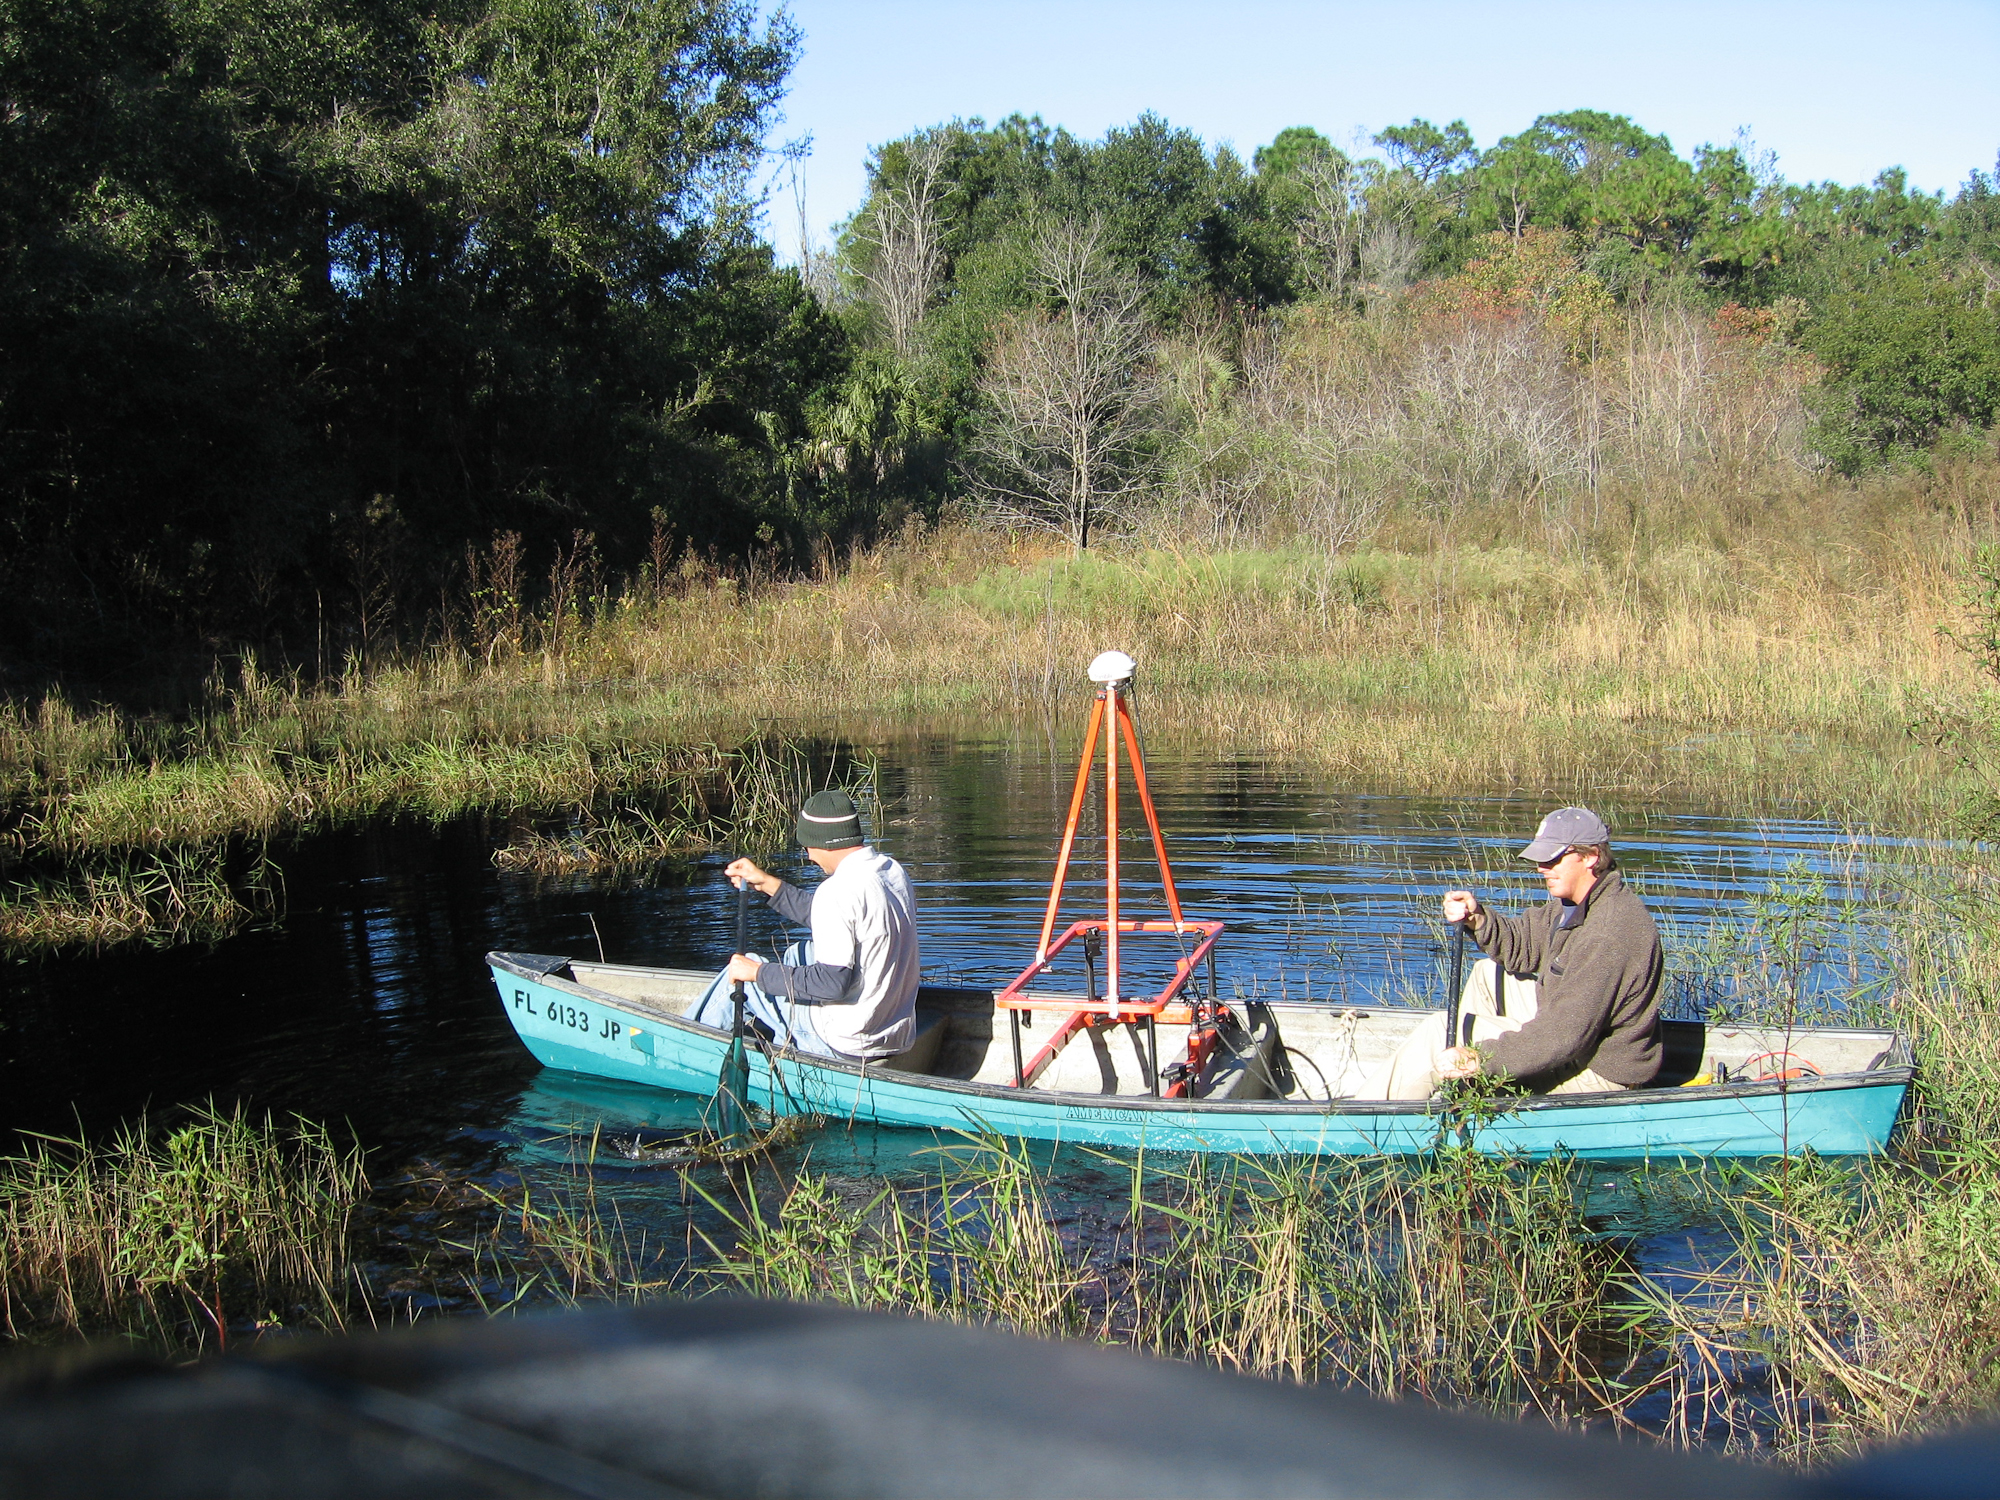 EM-61 survey across a shallow pond to find buried drums